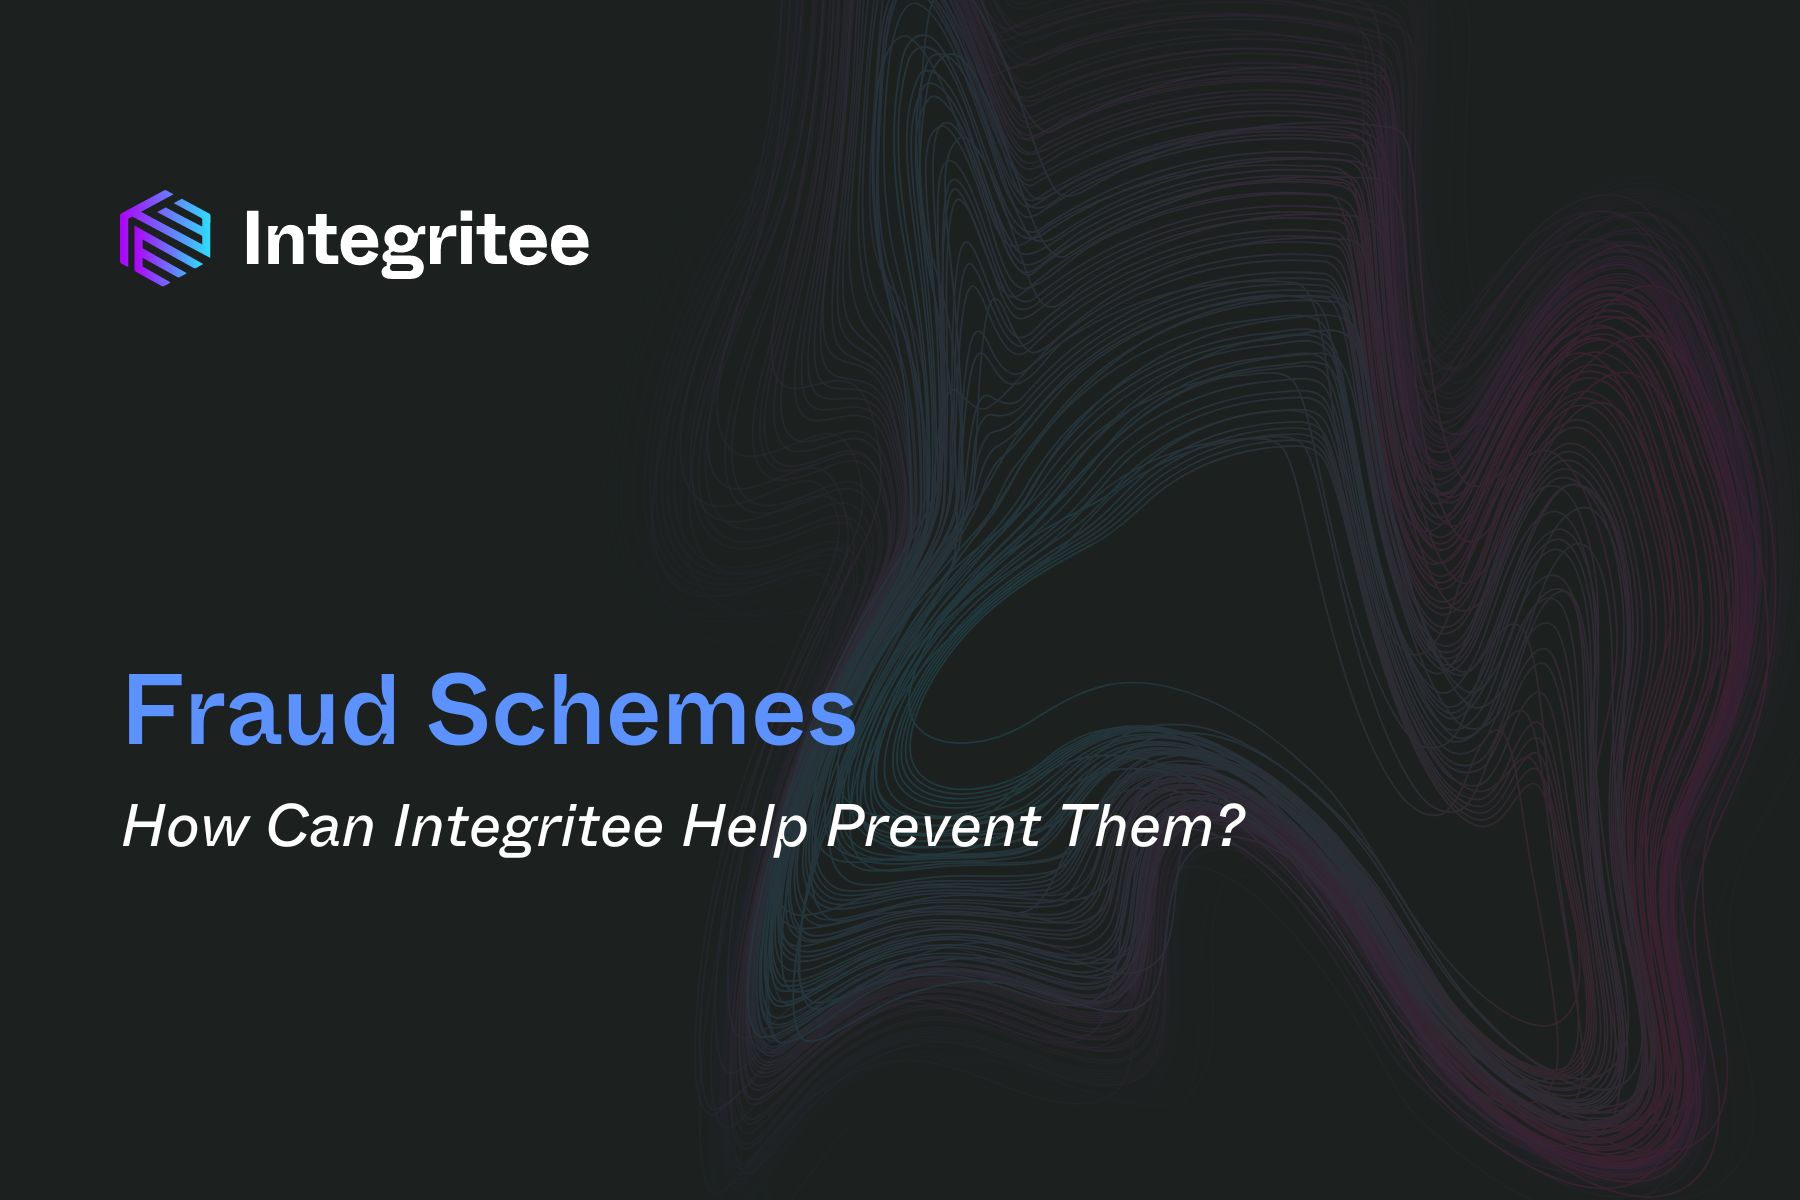 How Can Integritee Help Prevent Fraud Schemes?